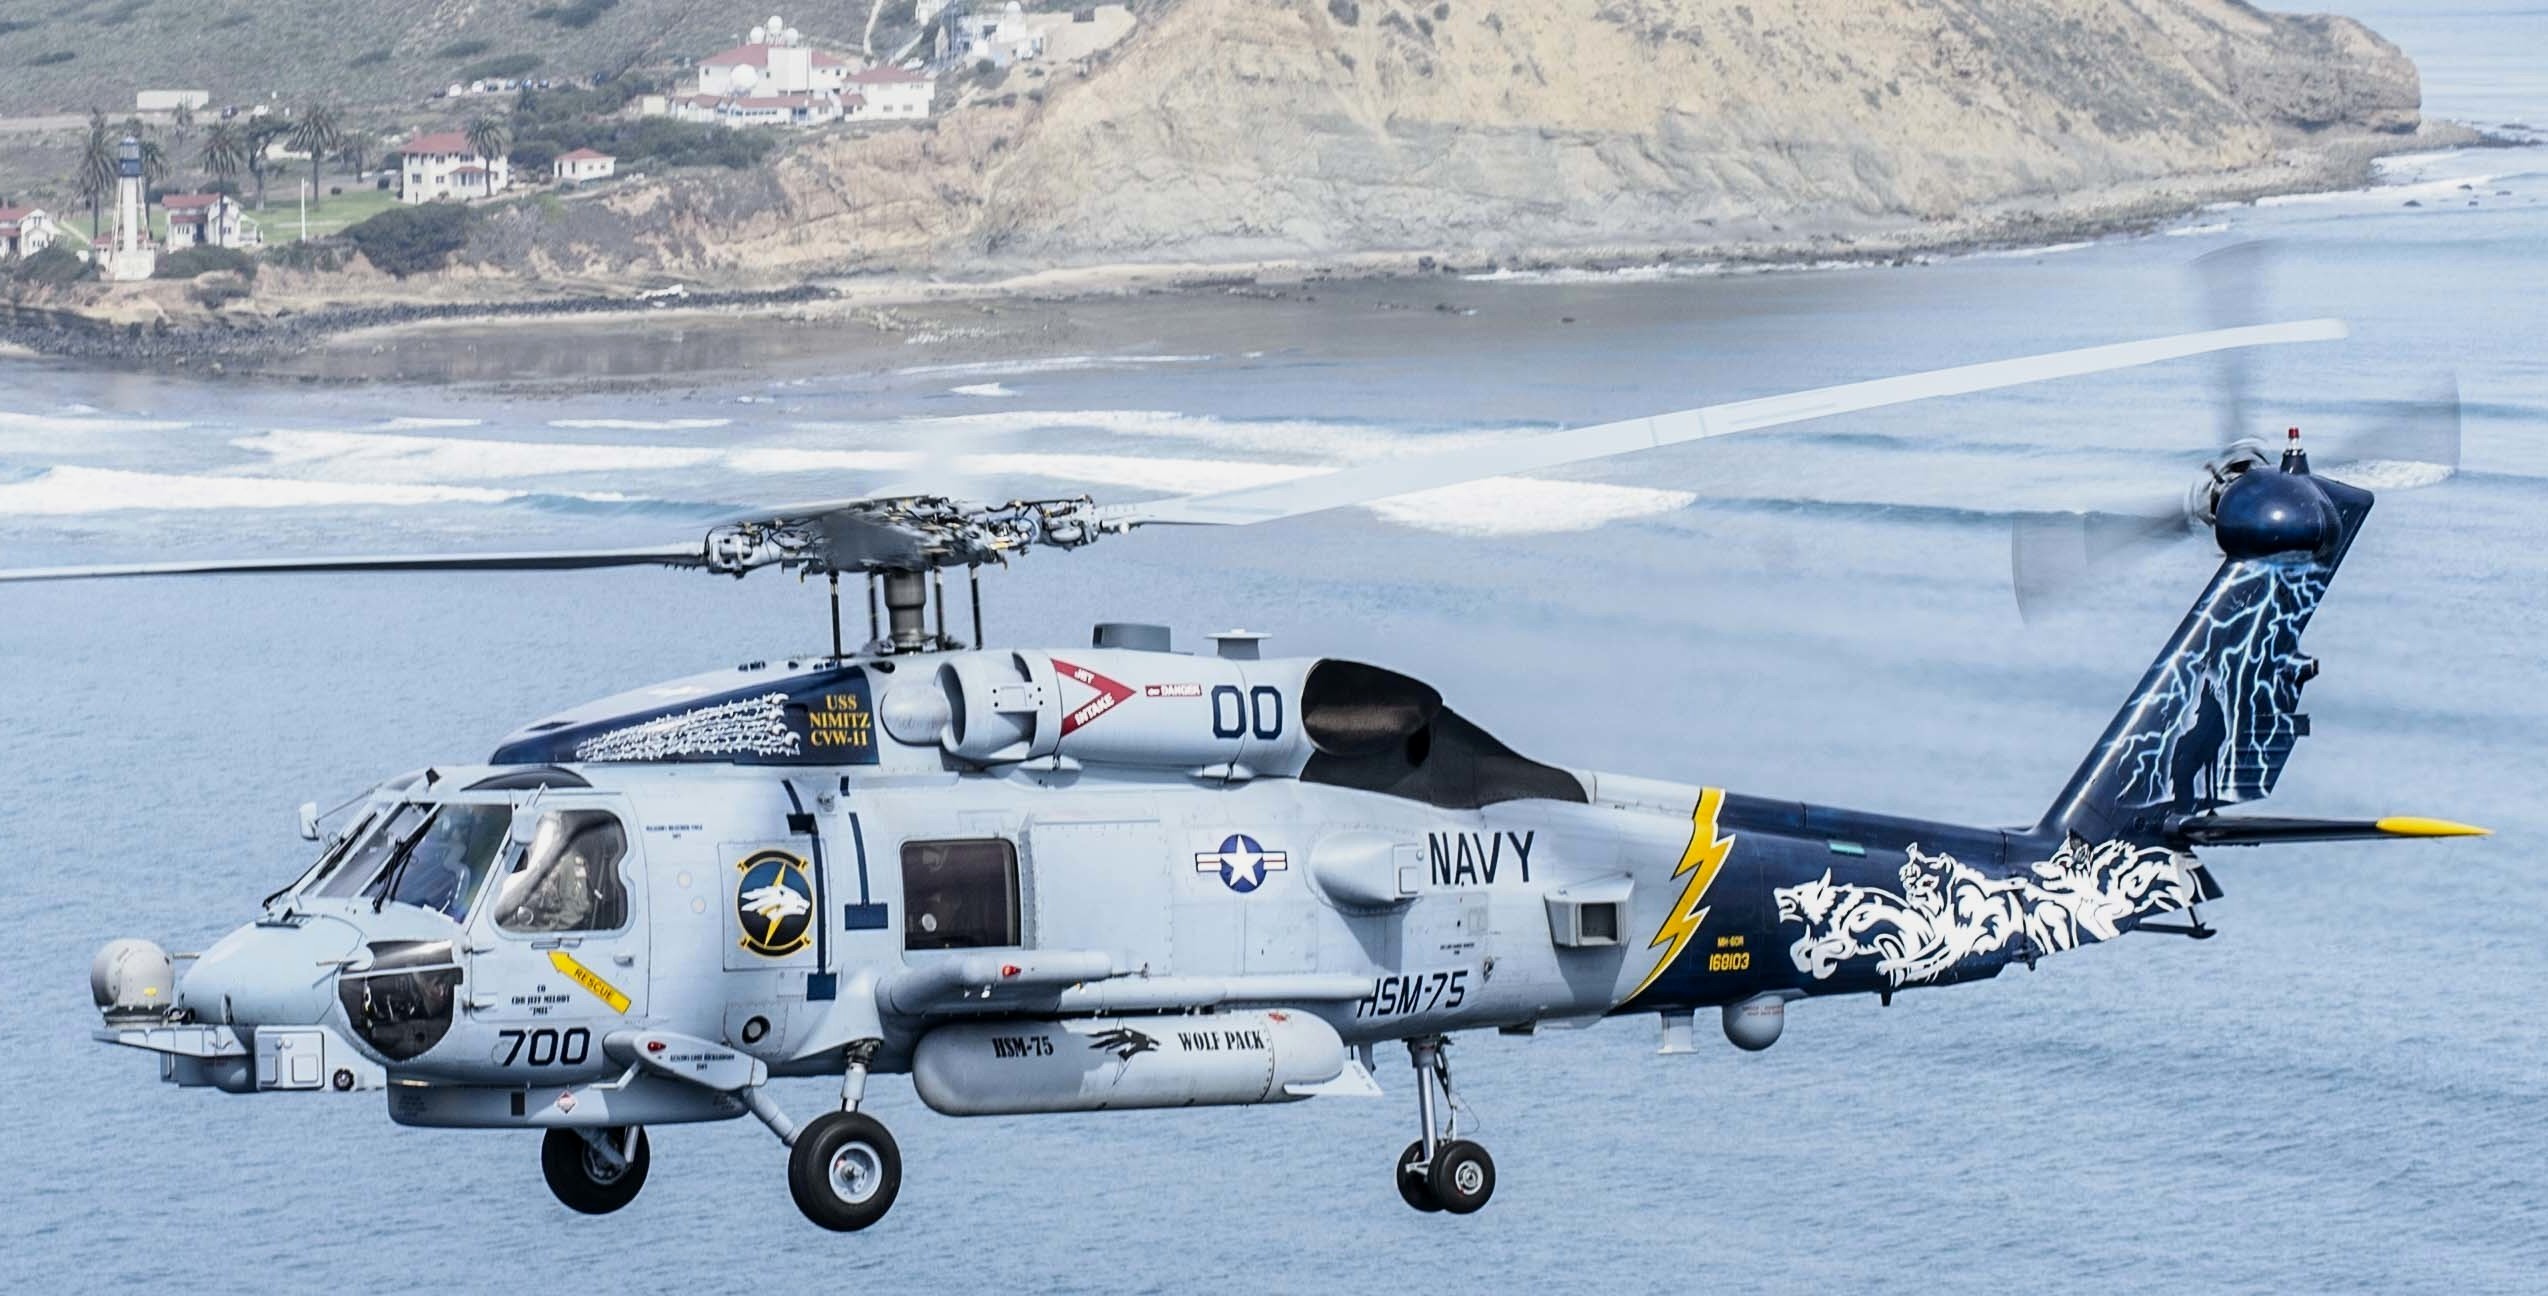 hsm-75 wolf pack helicopter maritime strike squadron mh-60r seahawk special livery painting 39